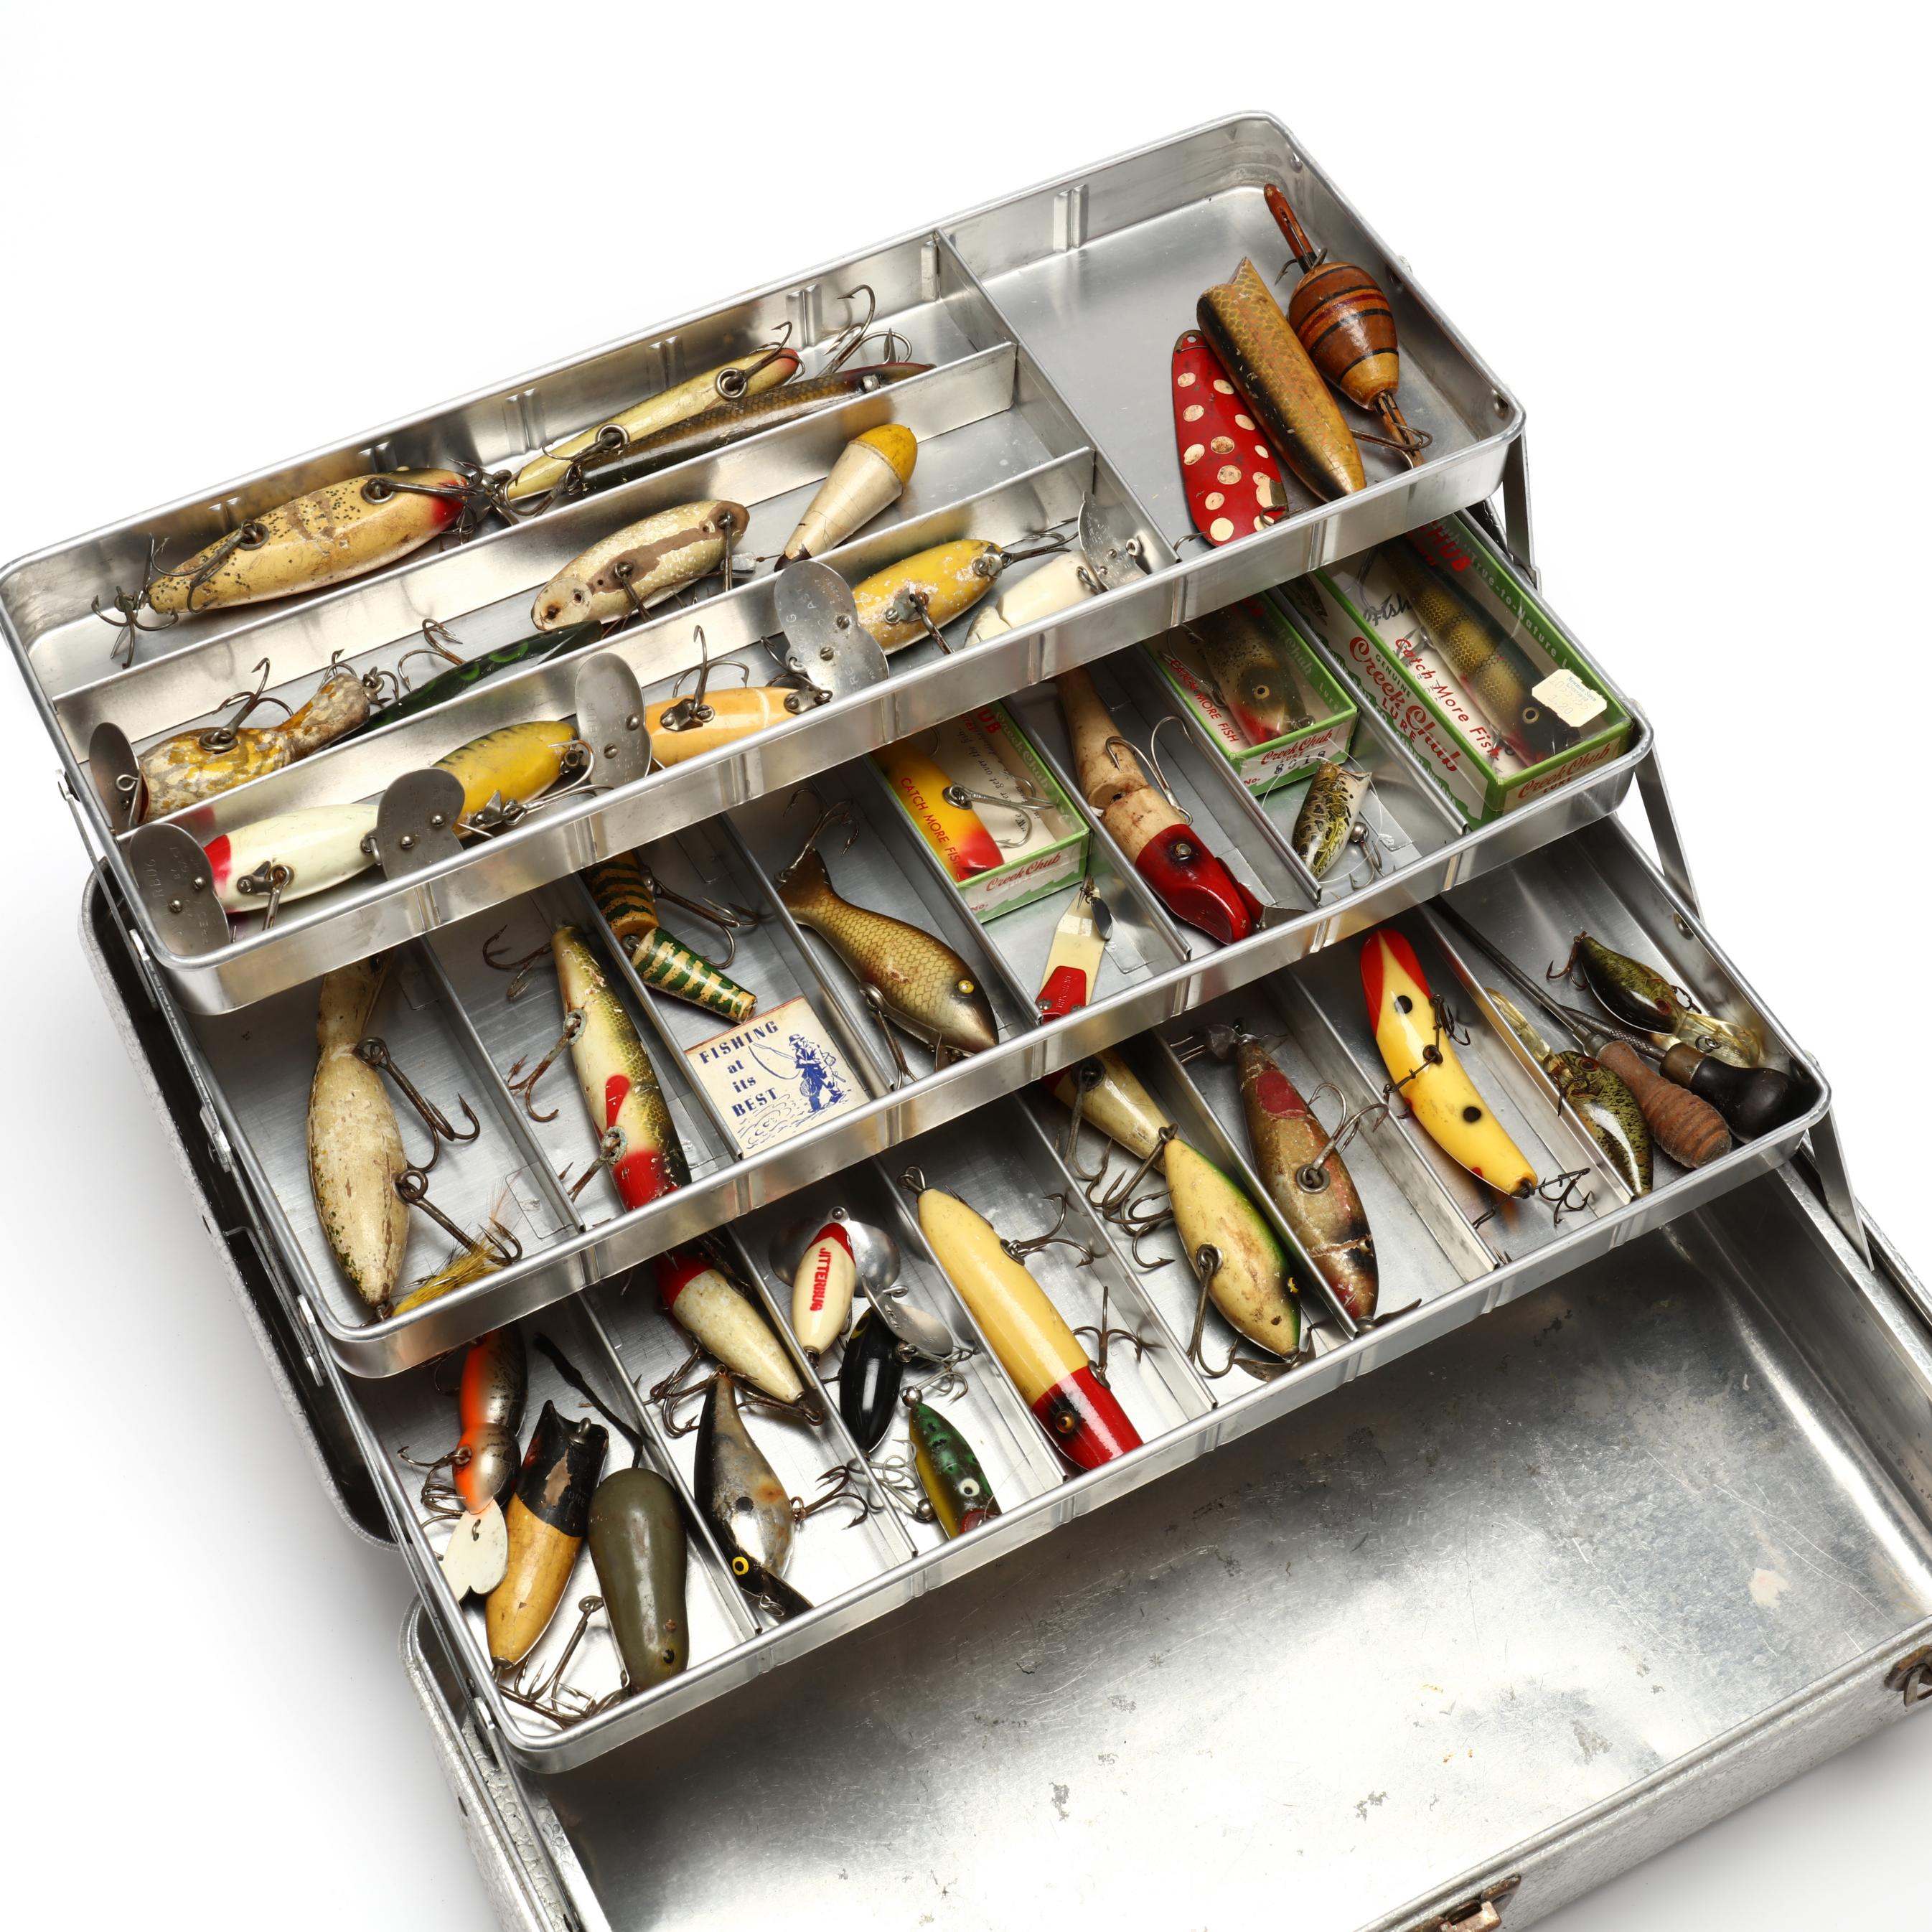 Early Tackle Box full of Vintage Fishing Lures (Lot 3262 - Fall